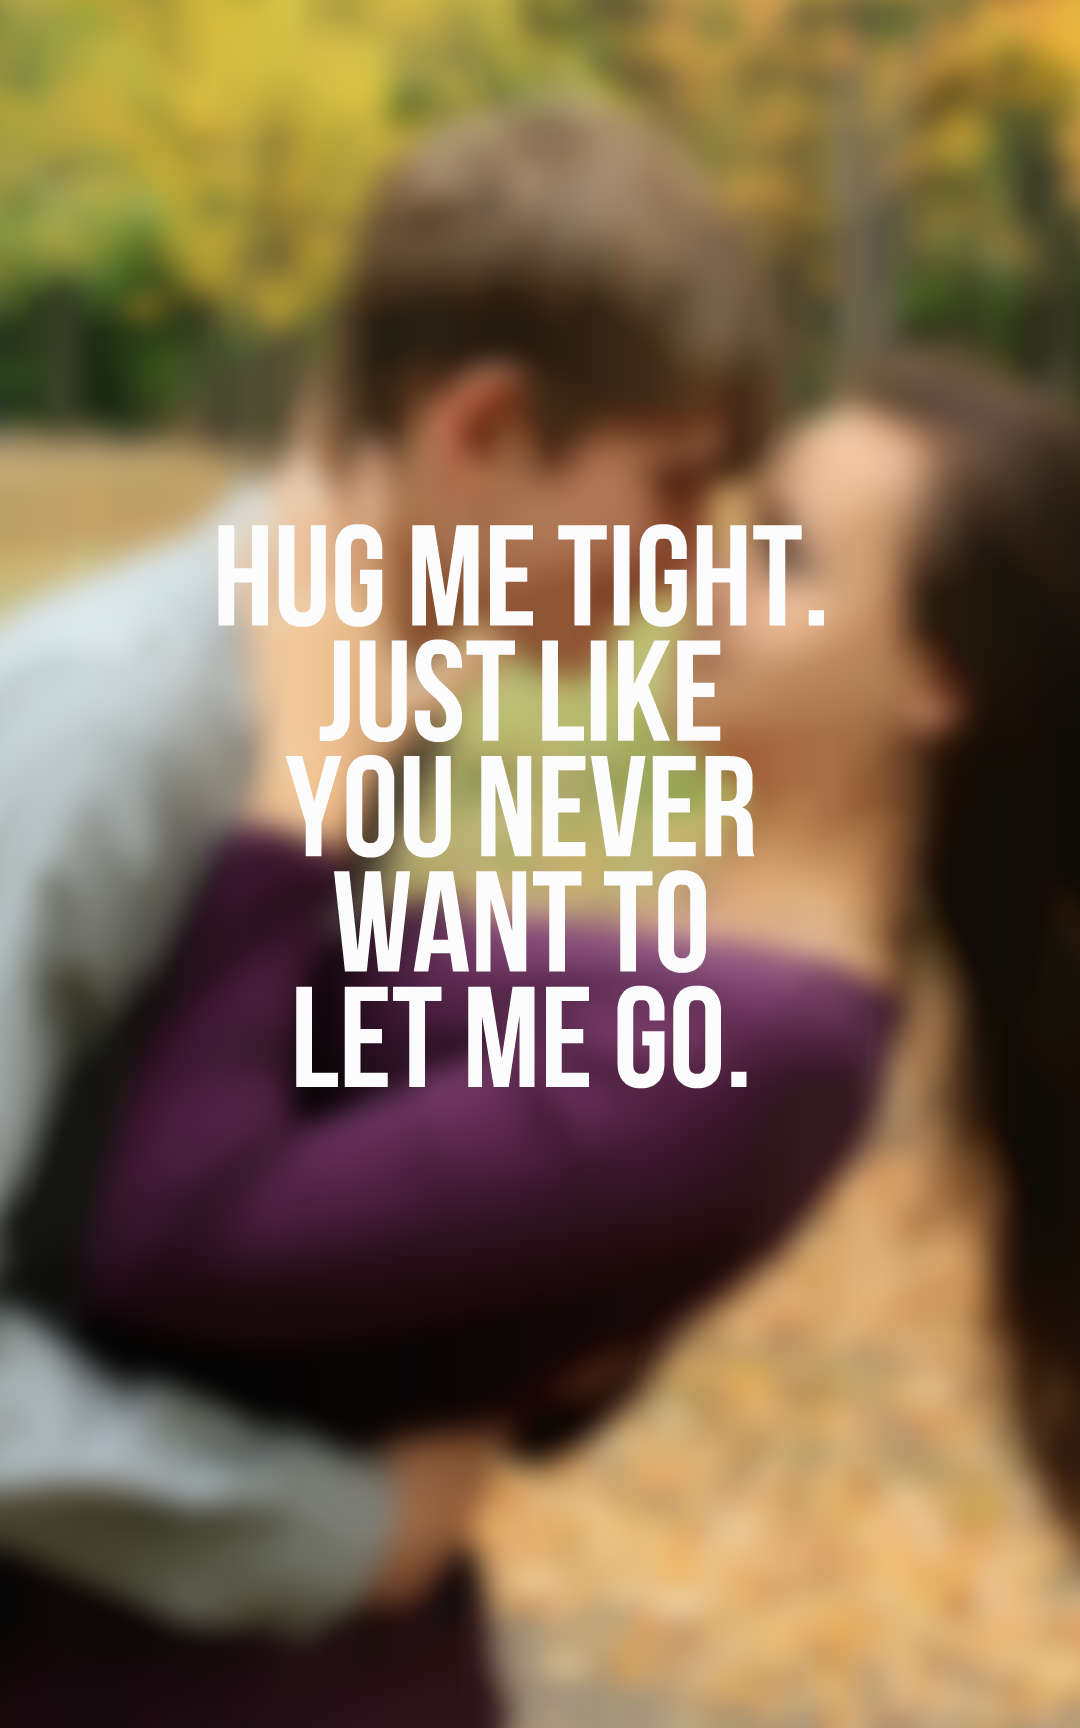 Hug me tight. Just like you never want to let me go.